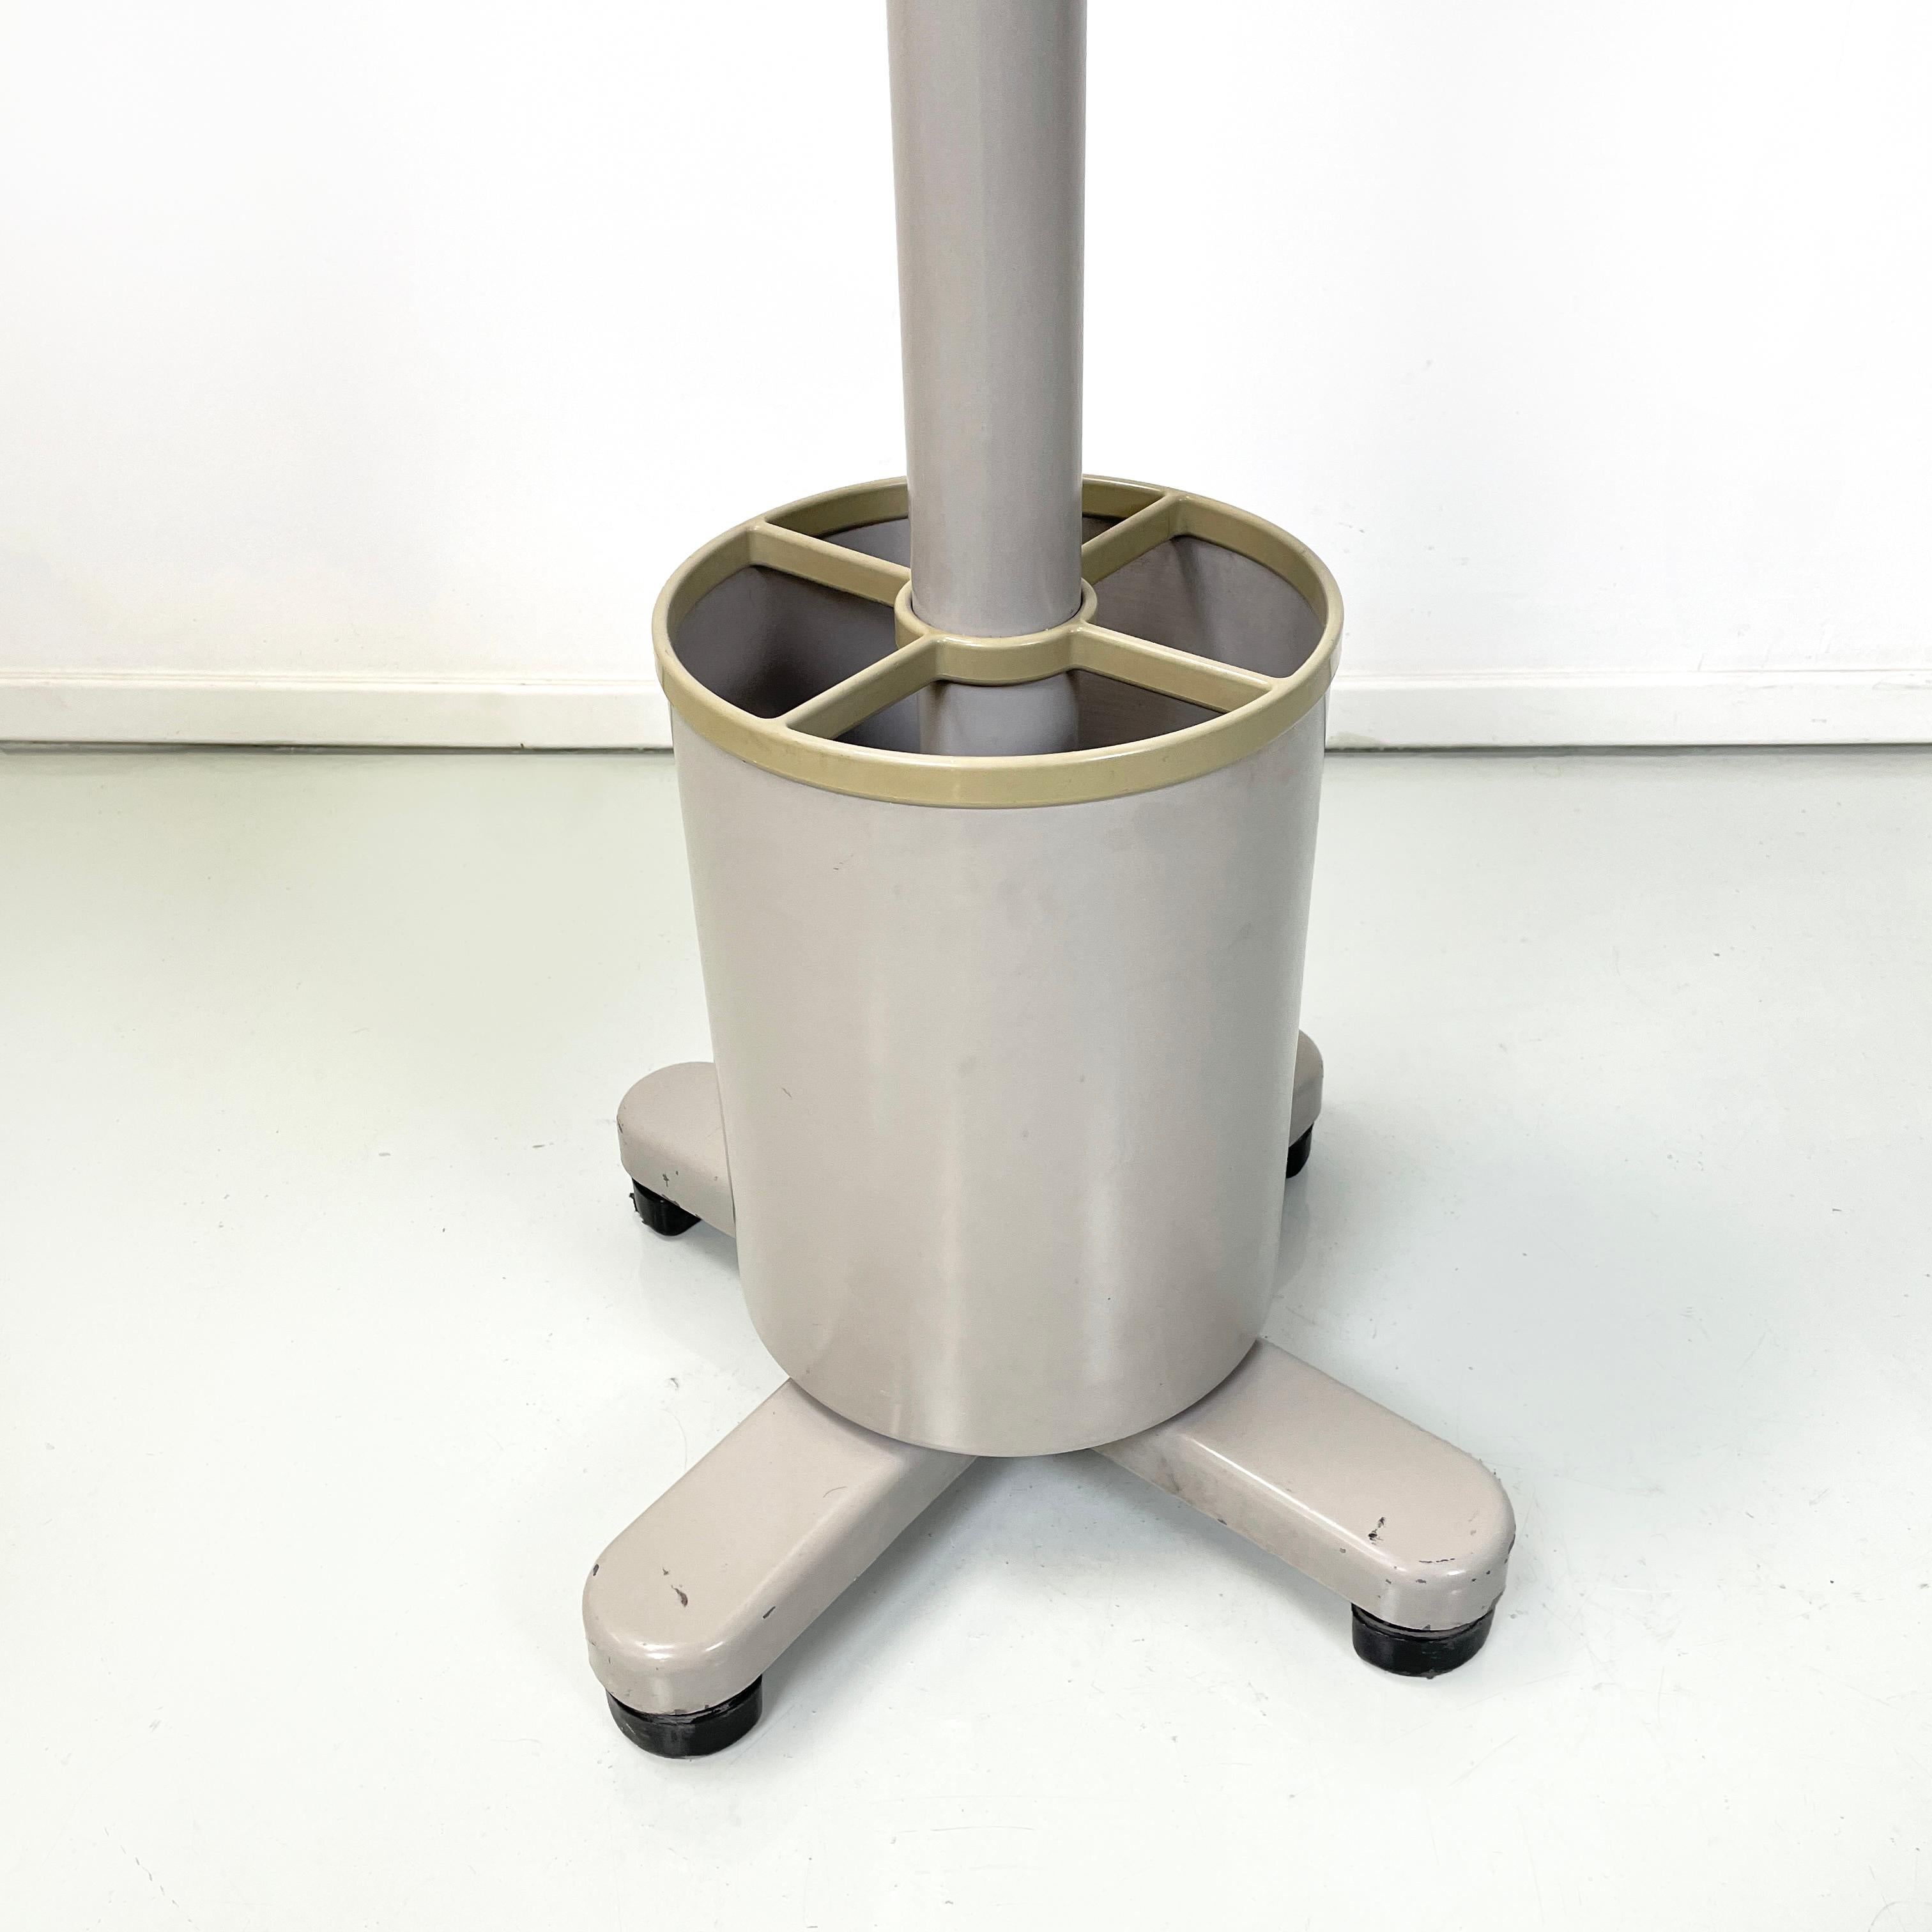 Italian modern floor coat hanger Synthesis 45 umbrella stand by Sottsass, 1990s For Sale 4